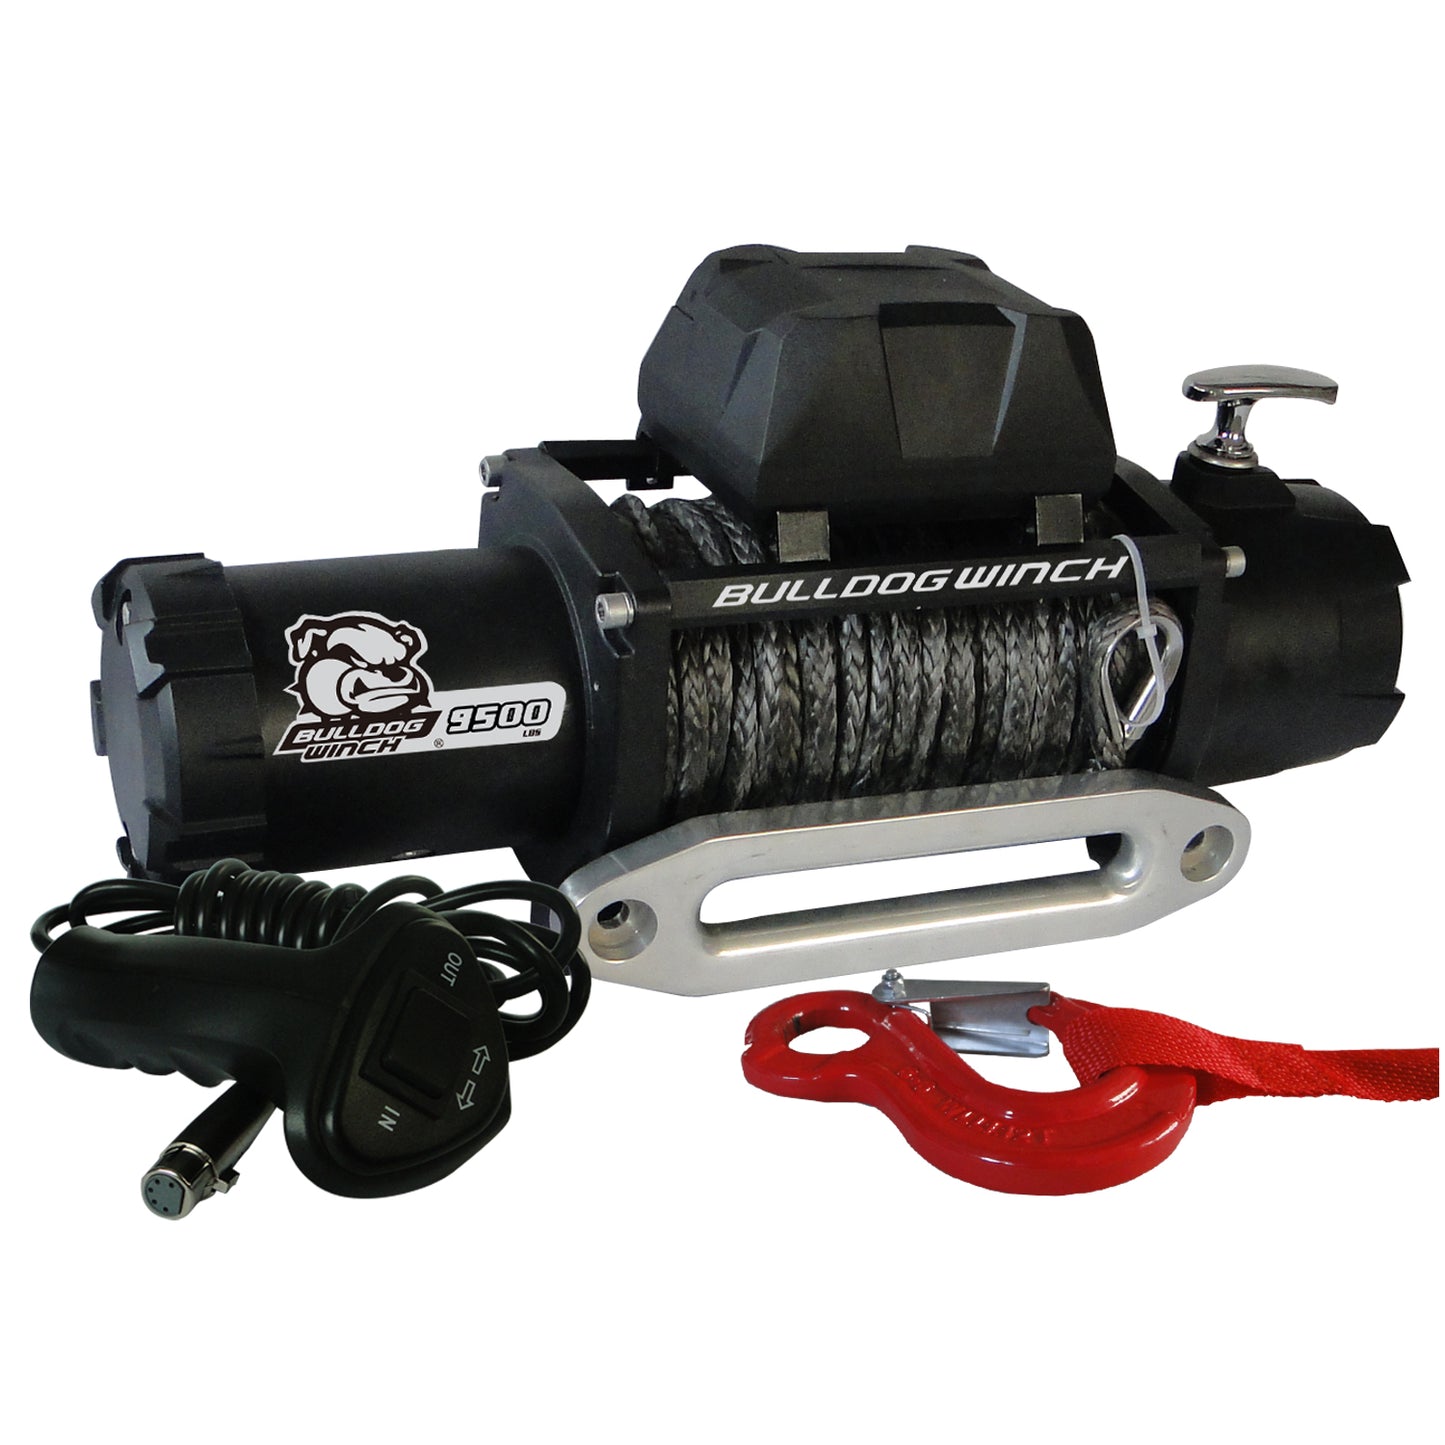 Bulldog Winch 9,500 LB Winch 100 Ft Synthetic Rope 5.5hp Series Wound Motor Roller Fairlead